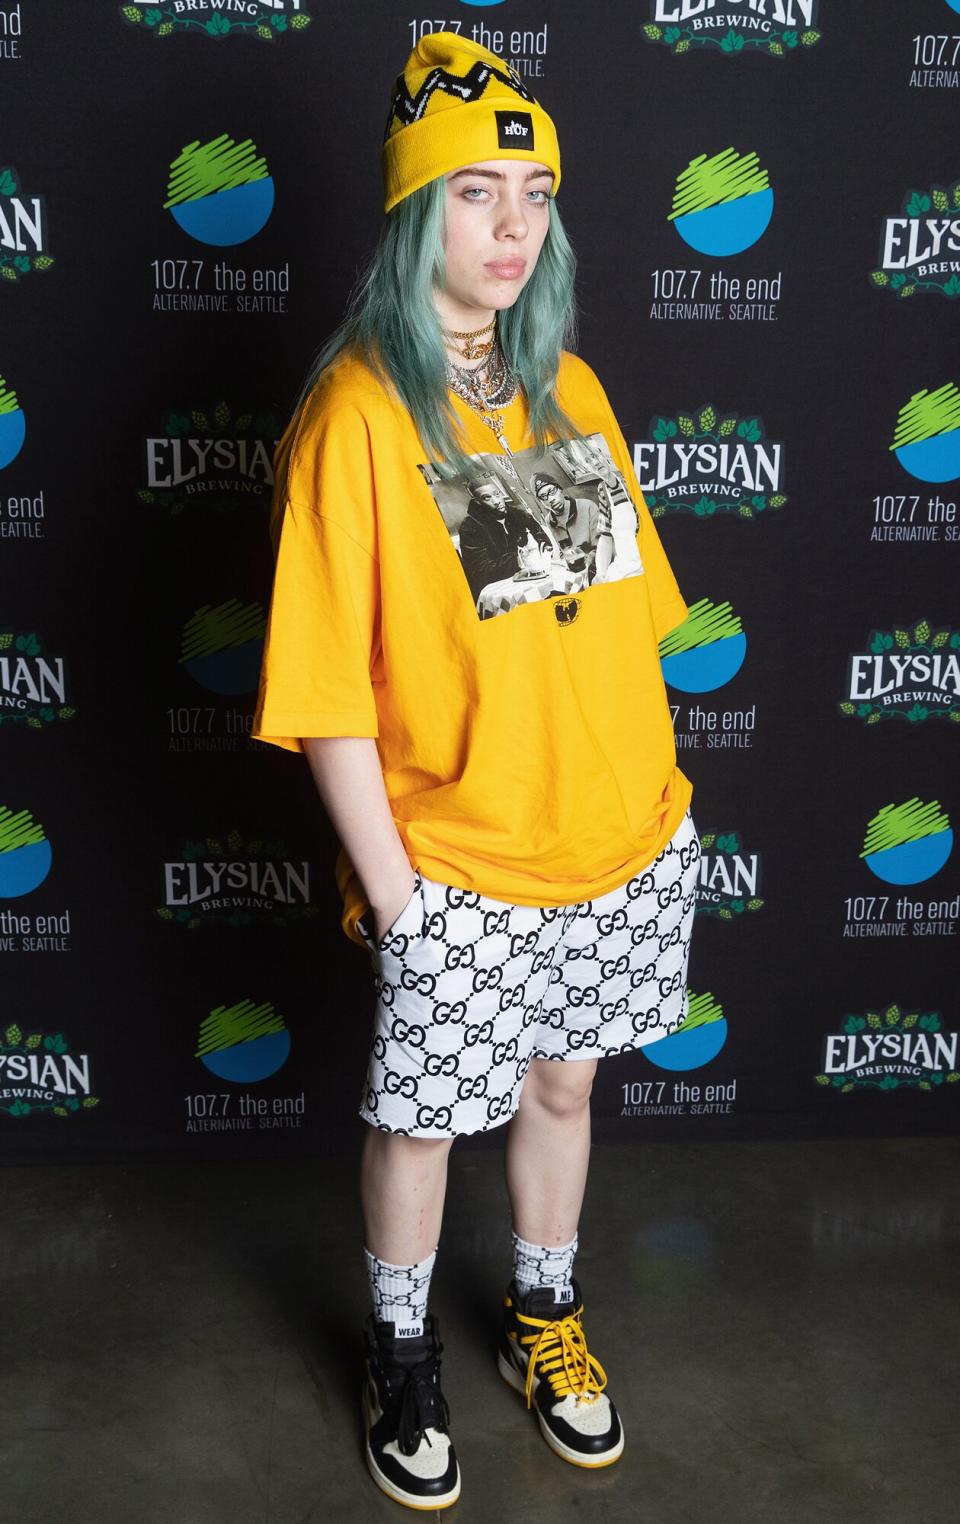 Billie Eilish poses for a photo backstage during Deck The Hall Ball hosted by 107.7 The End at WaMu Theater on December 11, 2018 in Seattle, Washington